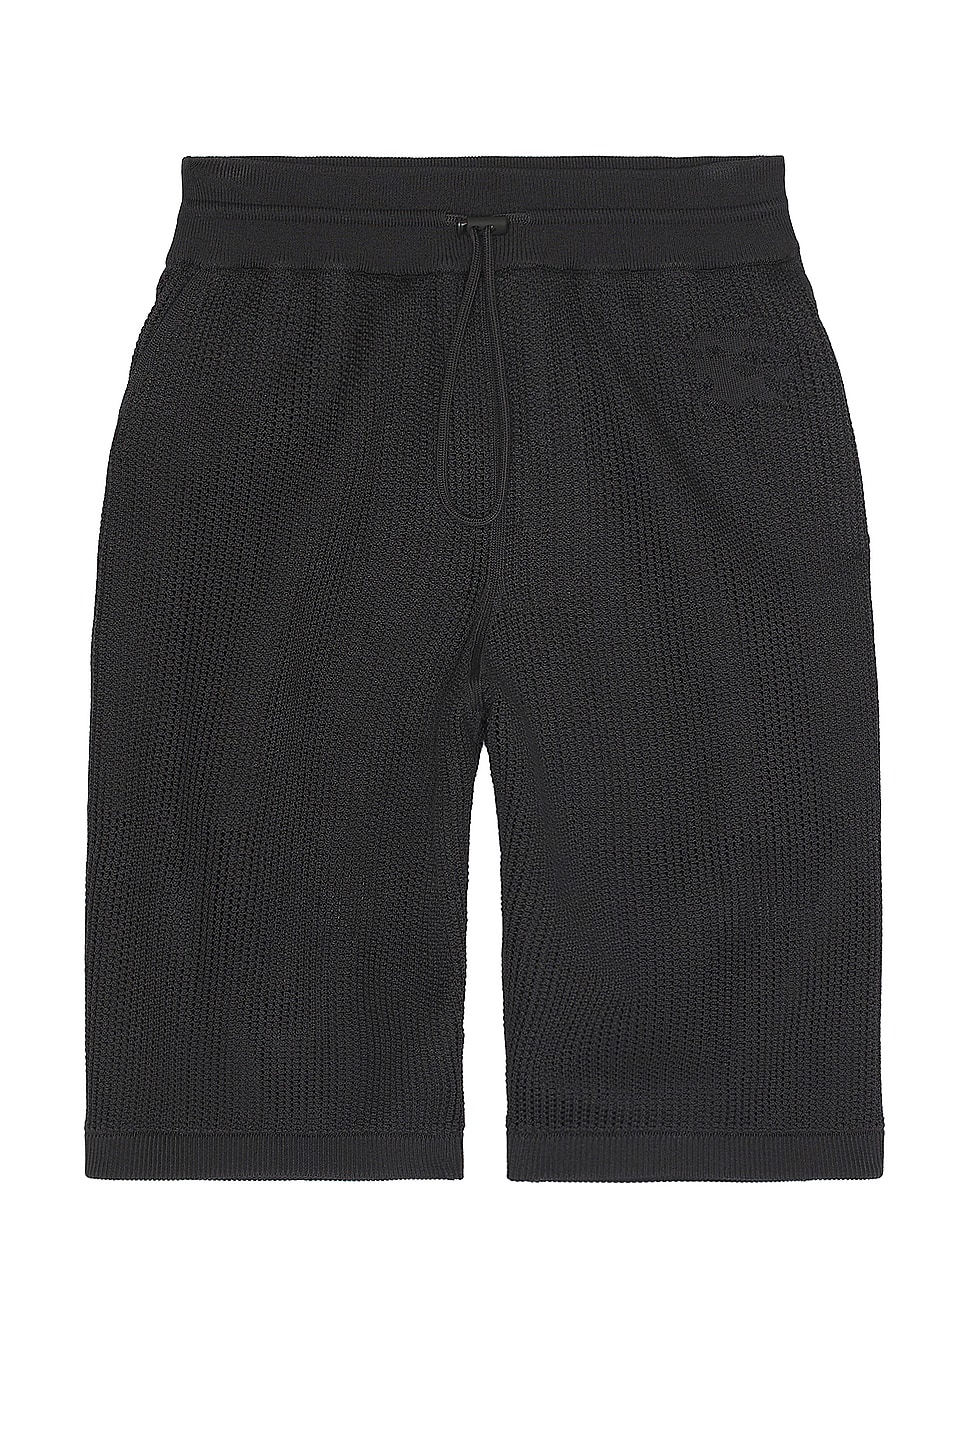 Image 1 of Burberry Classic Short in Onyx